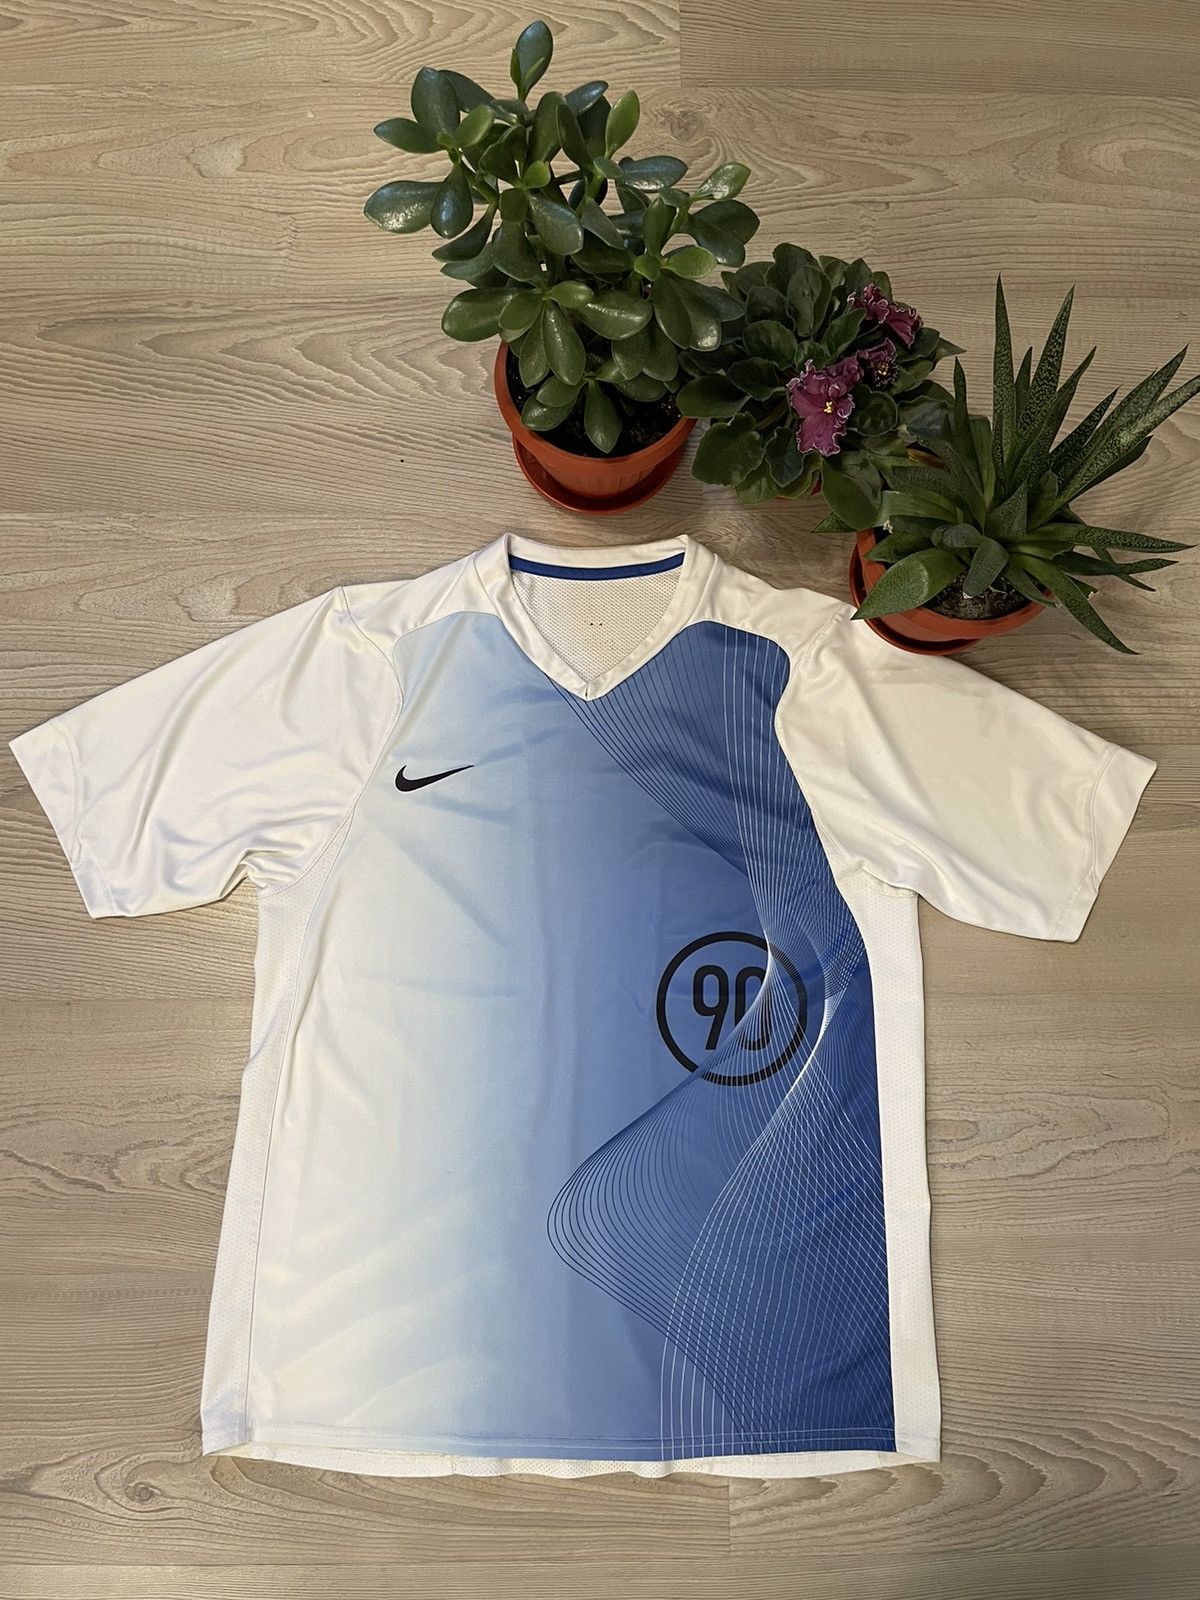 Pre-owned Nike X Soccer Jersey Nike Tn Full Print Vintage Jersey In White Blue